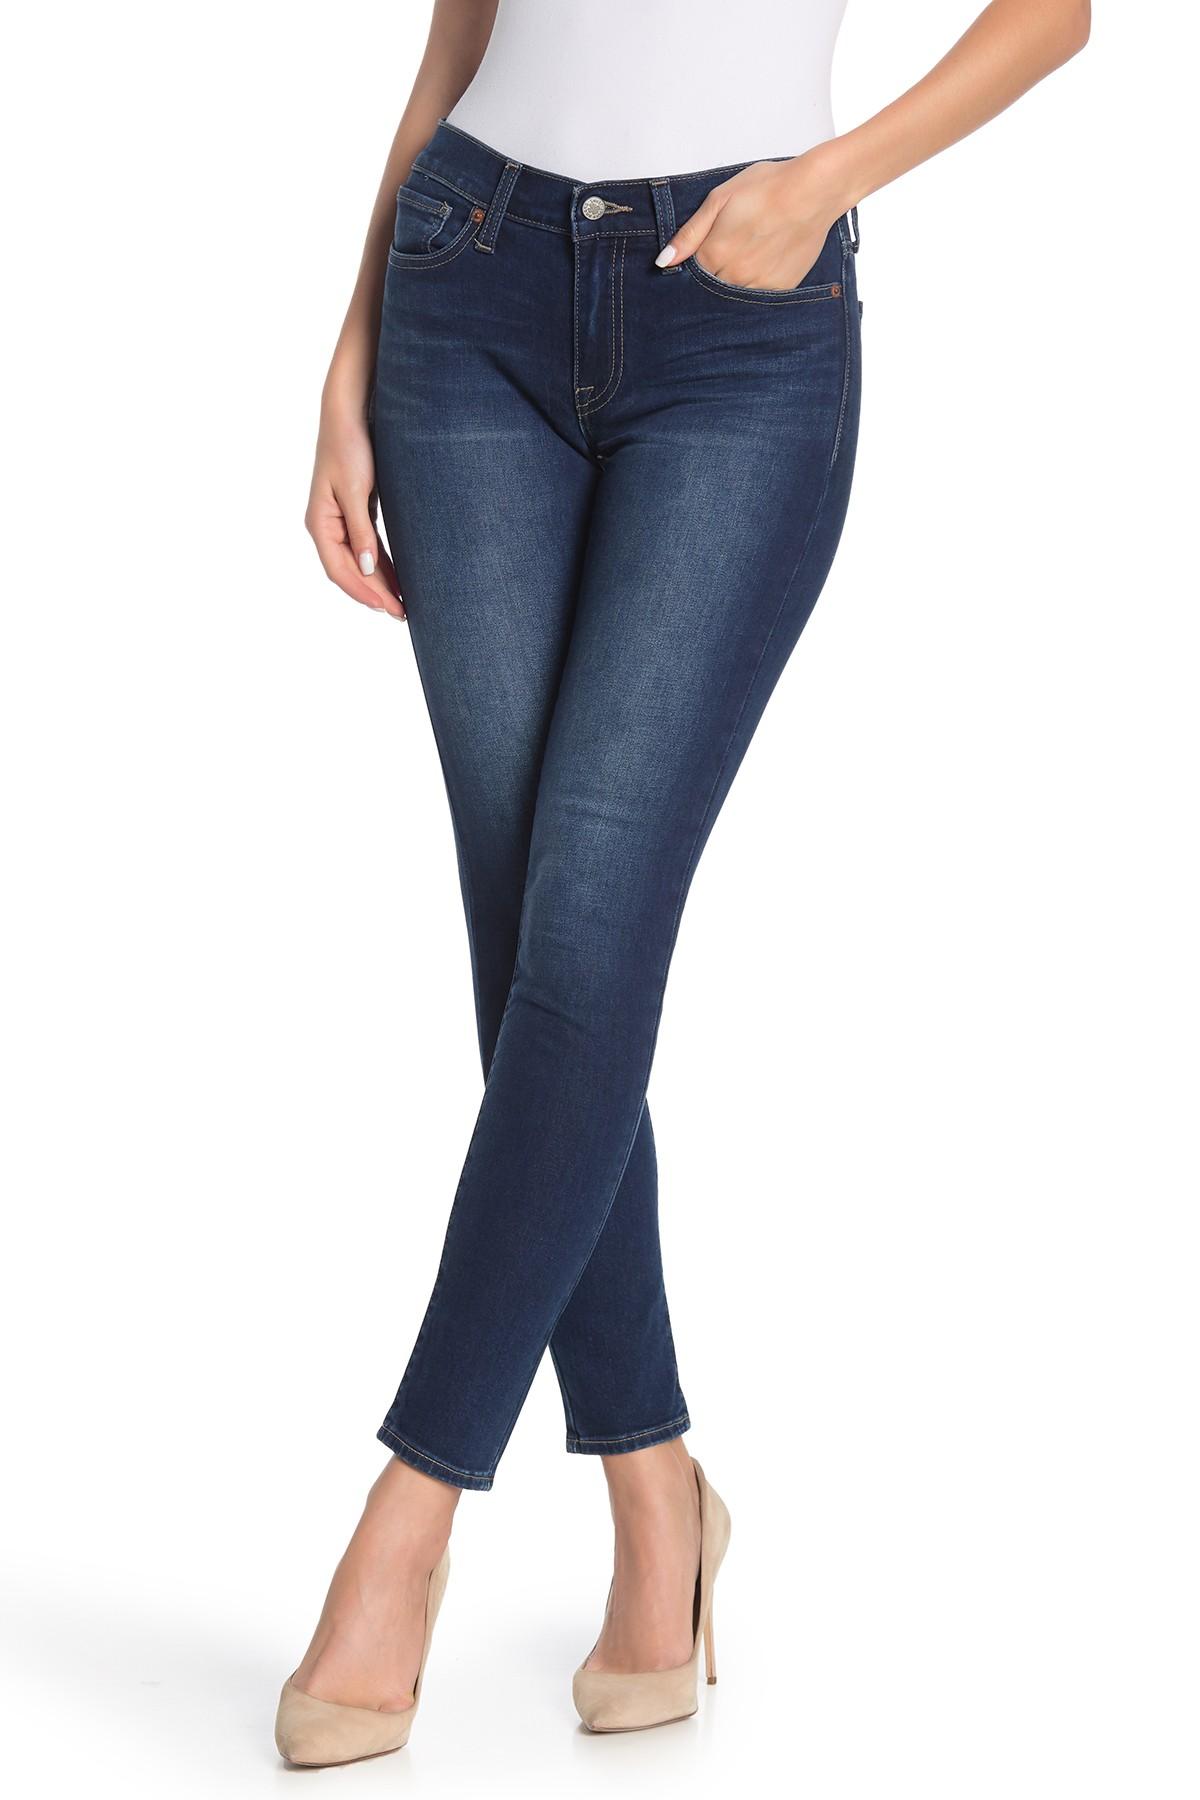 Lucky Brand Cotton Brooke Ankle Skinny Jeans in Blue - Lyst